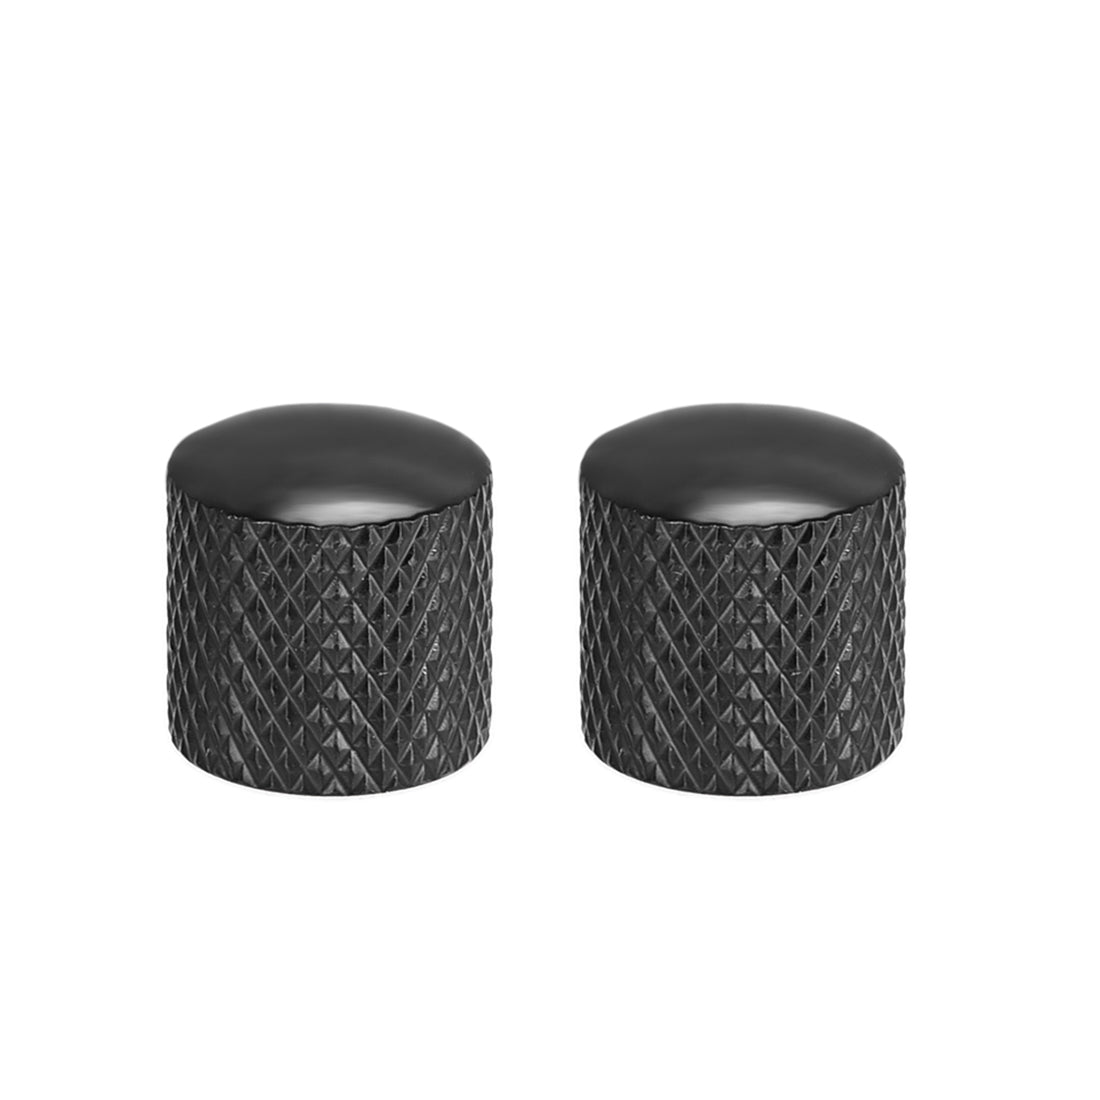 uxcell Uxcell 6mm Metal Potentiometer Control Knobs For Electric Guitar Bass Volume Tone Knobs Black 2pcs